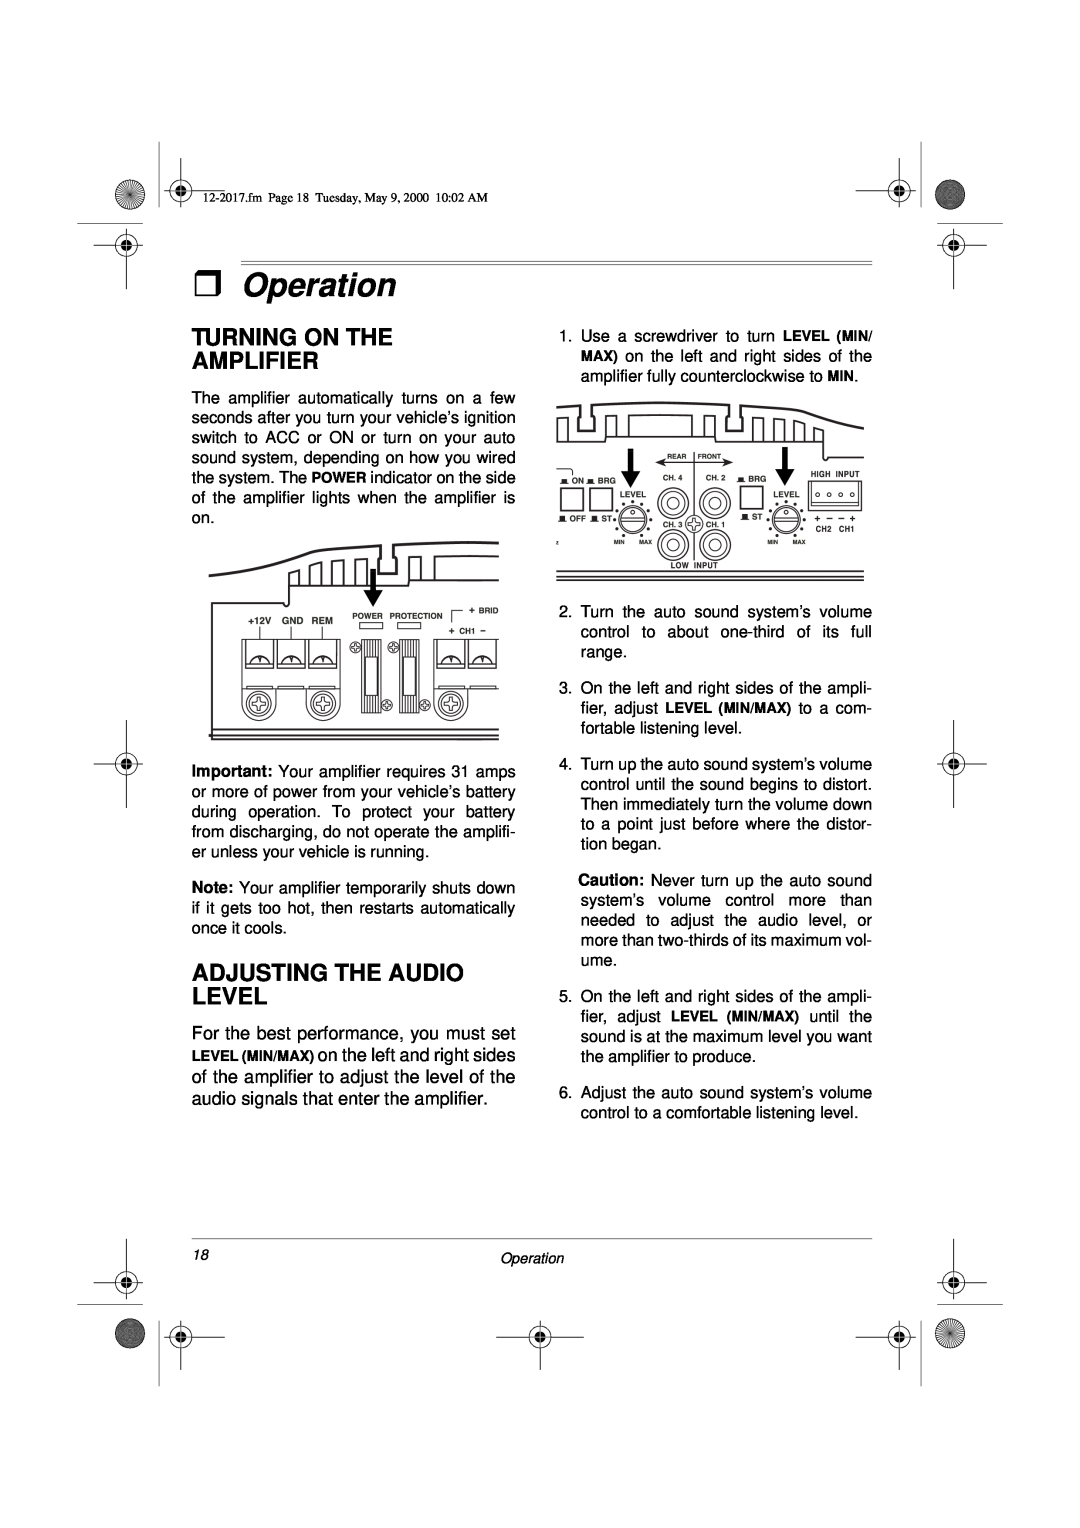 Radio Shack XL-260 owner manual ˆOperation, Turning On The Amplifier, Adjusting The Audio Level 